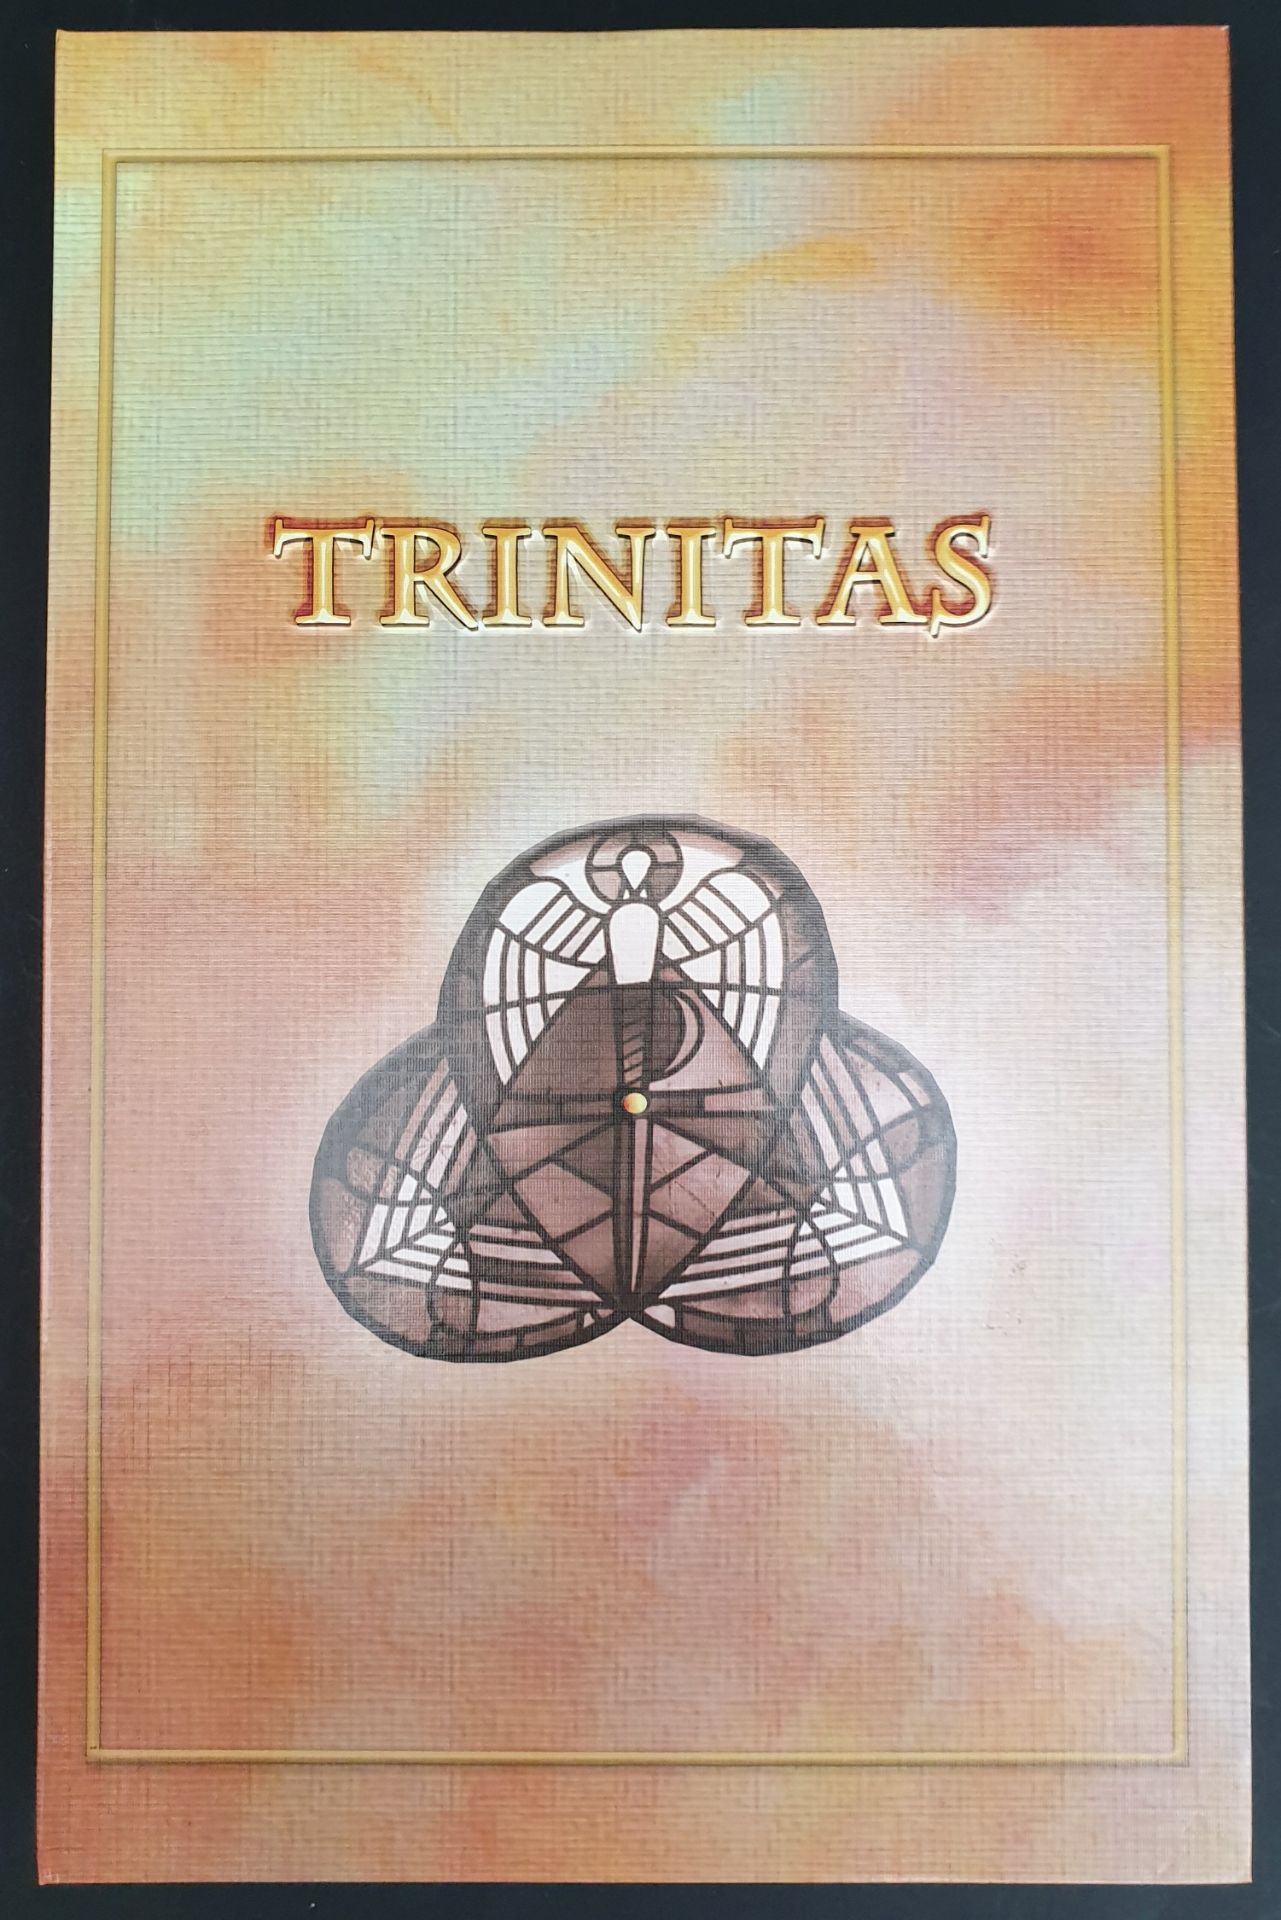 Collectable Coins Set of 4 Trinitas 2015 - Image 2 of 2